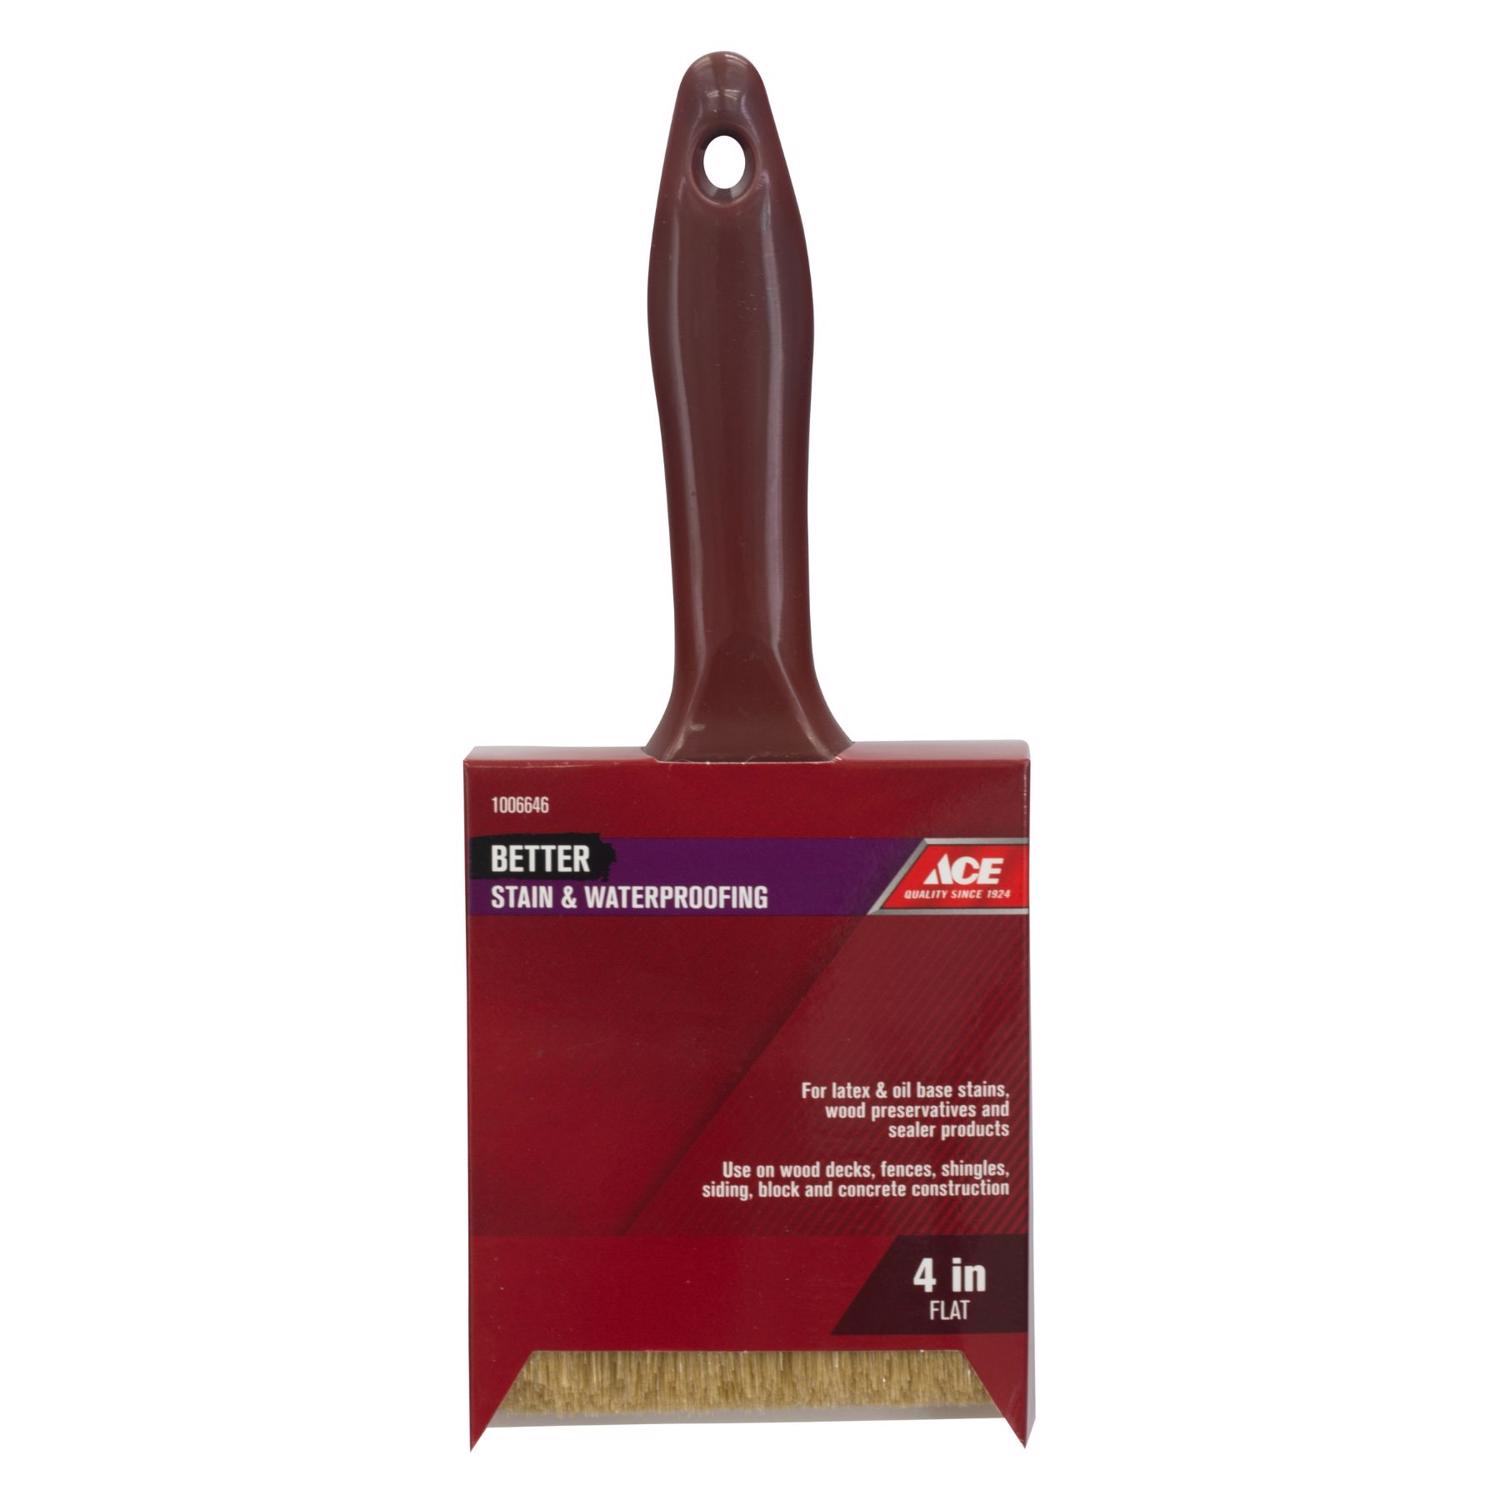 ArroWorthy 1550 Double-Thick Chip Brush